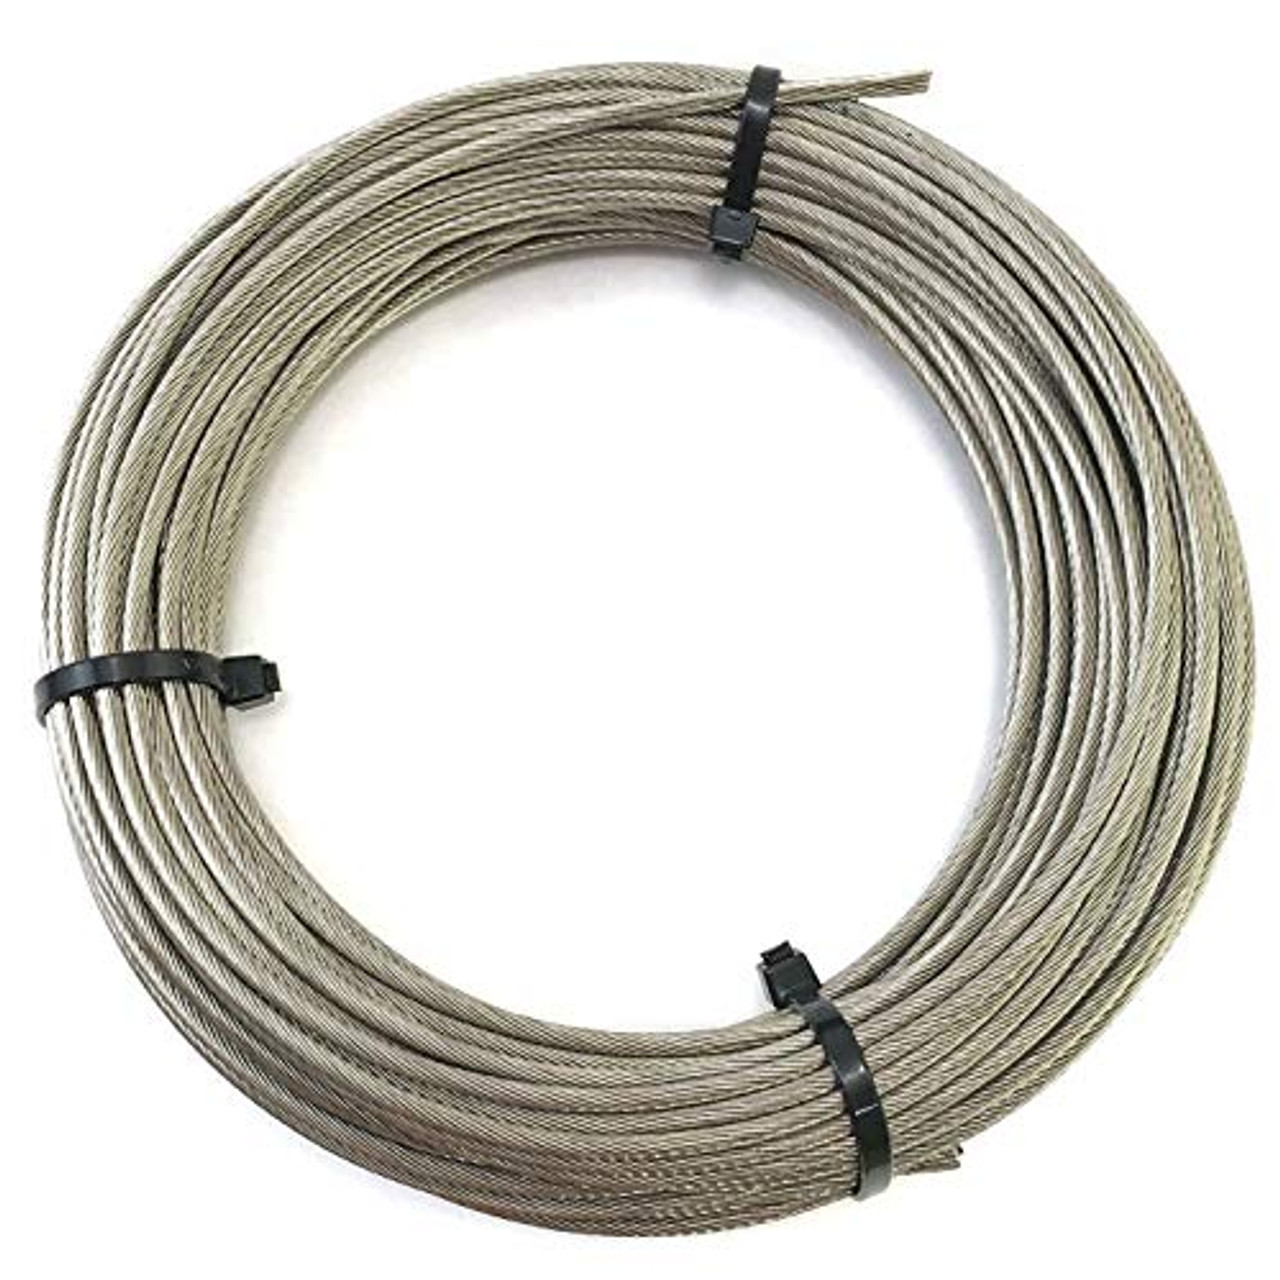 High Brightness Stainless Steel 316 Wire Rope Cable 1/16 7x7 by 1000'  Marine Grade